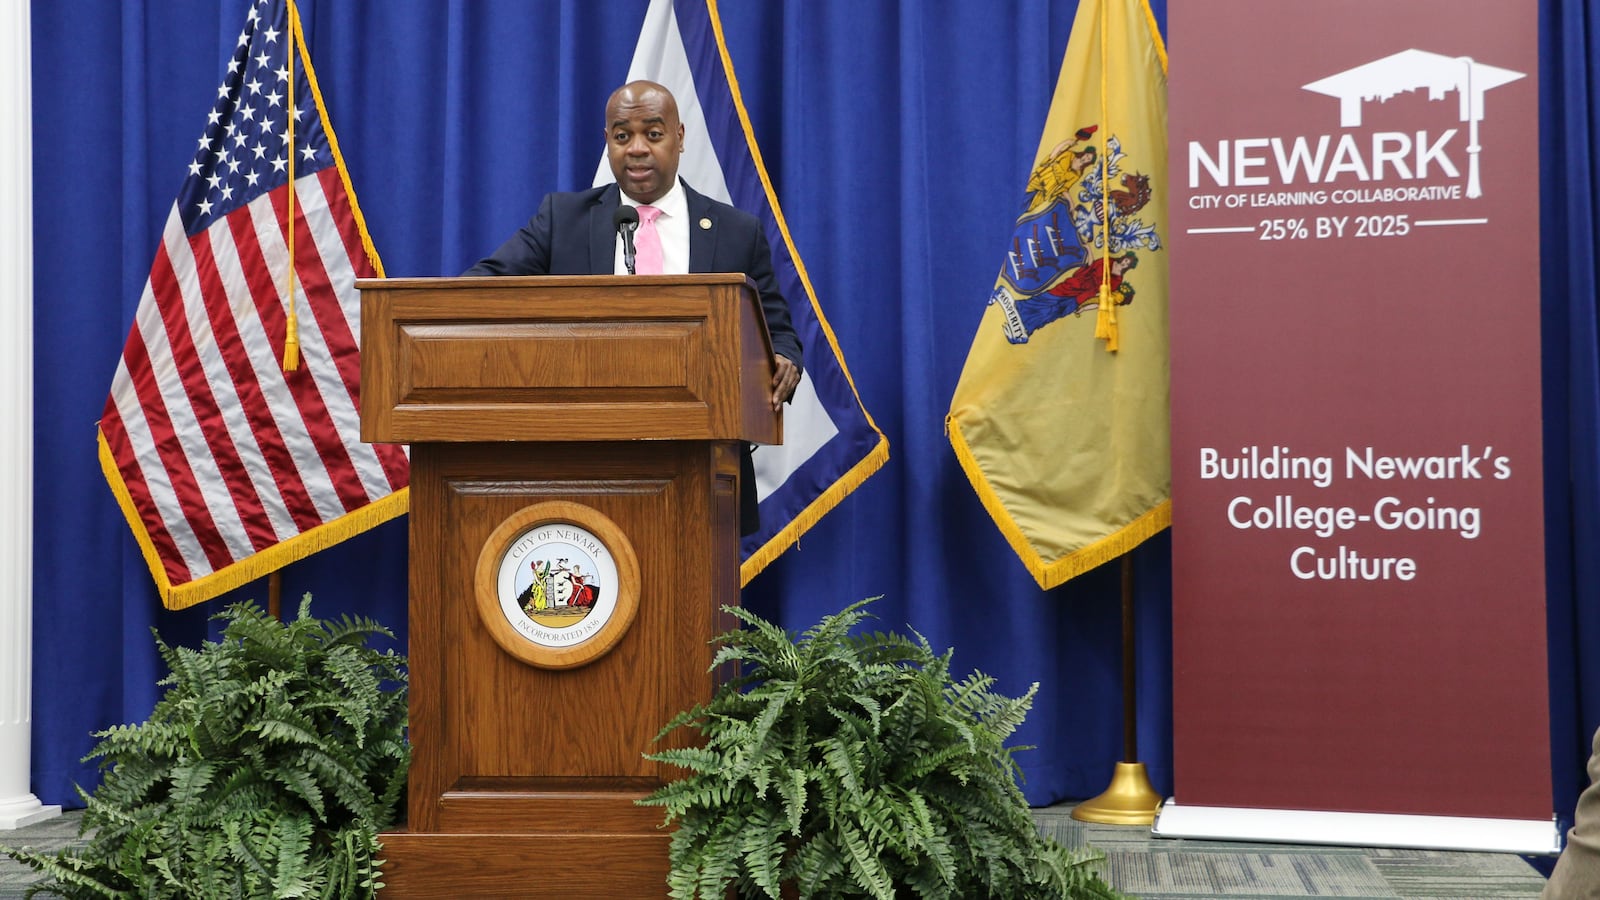 Newark Mayor Ras Baraka wants 25 percent of residents to have college degrees by 2025, up from 19 percent today.